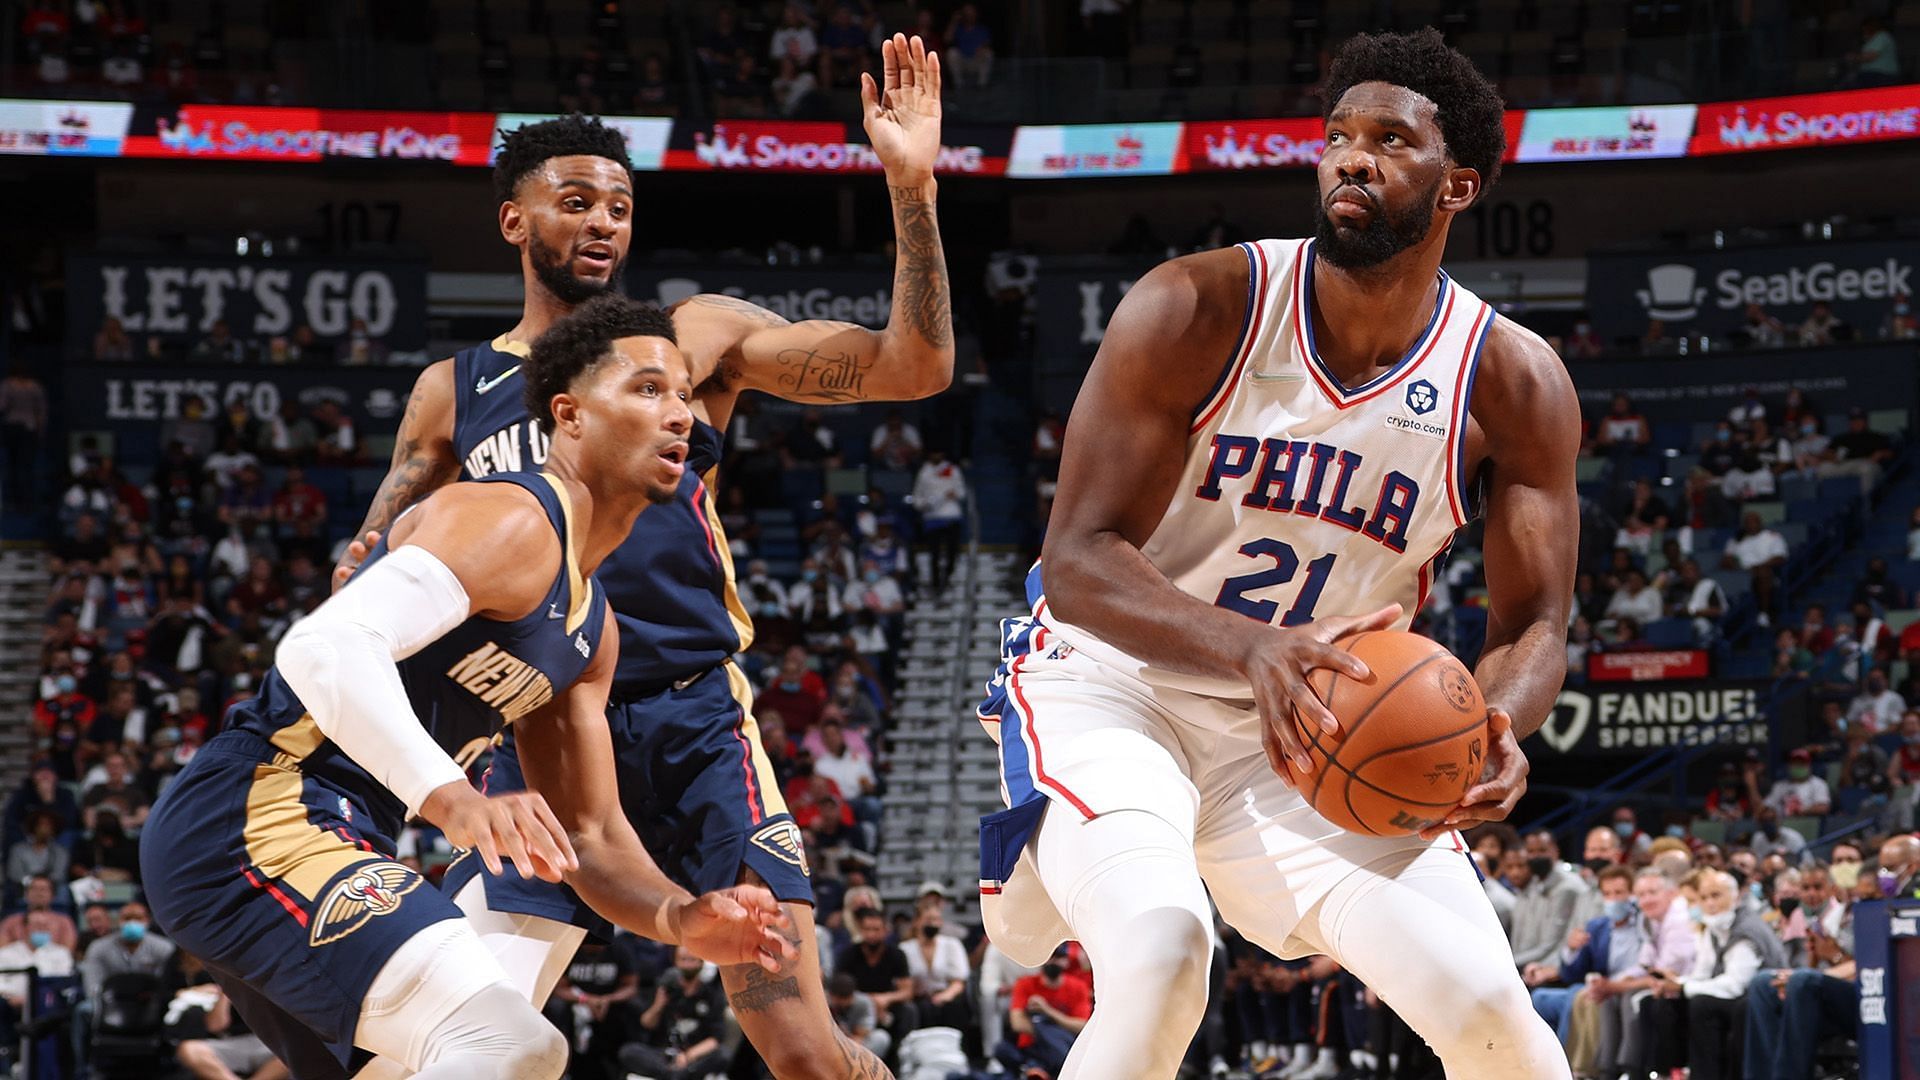 The New Orleans Pelicans will face the Philadelphia 76ers for the second time this season. [Photo: NBA.com]